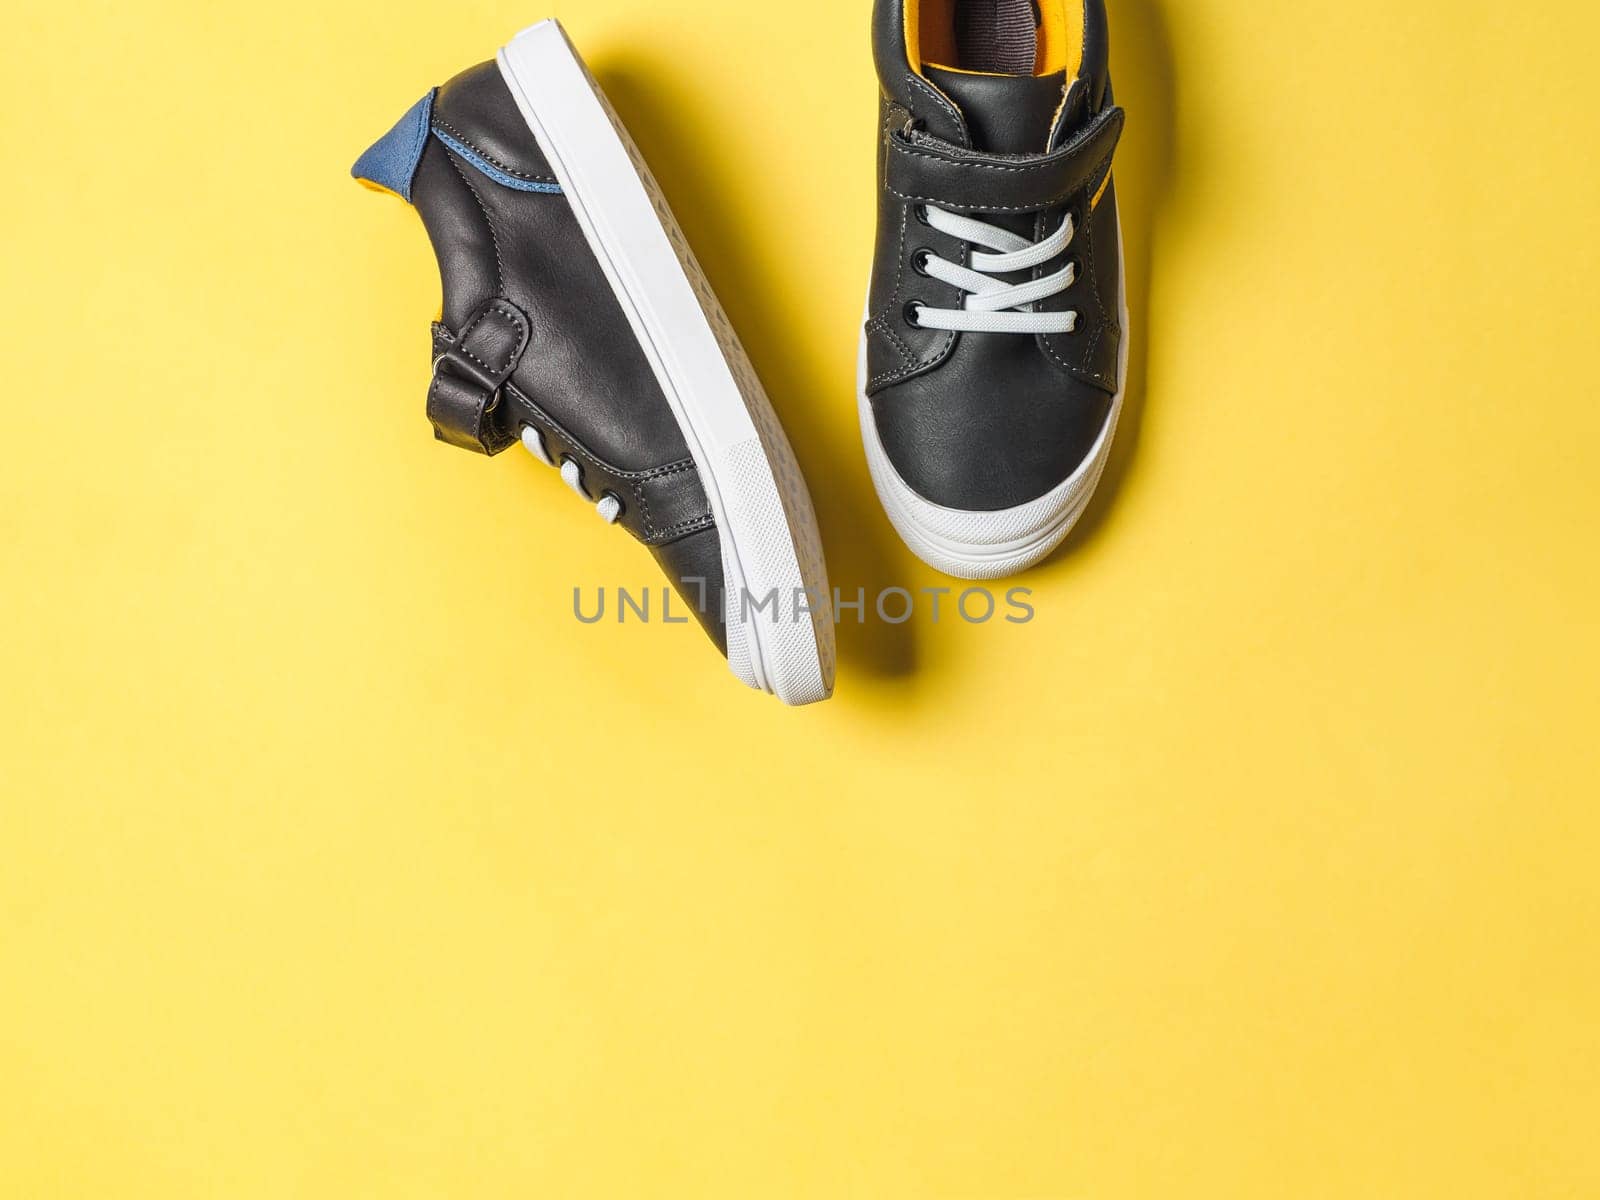 pair of new kids or adult sneakers on yellow background, top view. Flat lay gray and yellow or mustard color sneakers shoes on colorful bright background with copy space for text or design